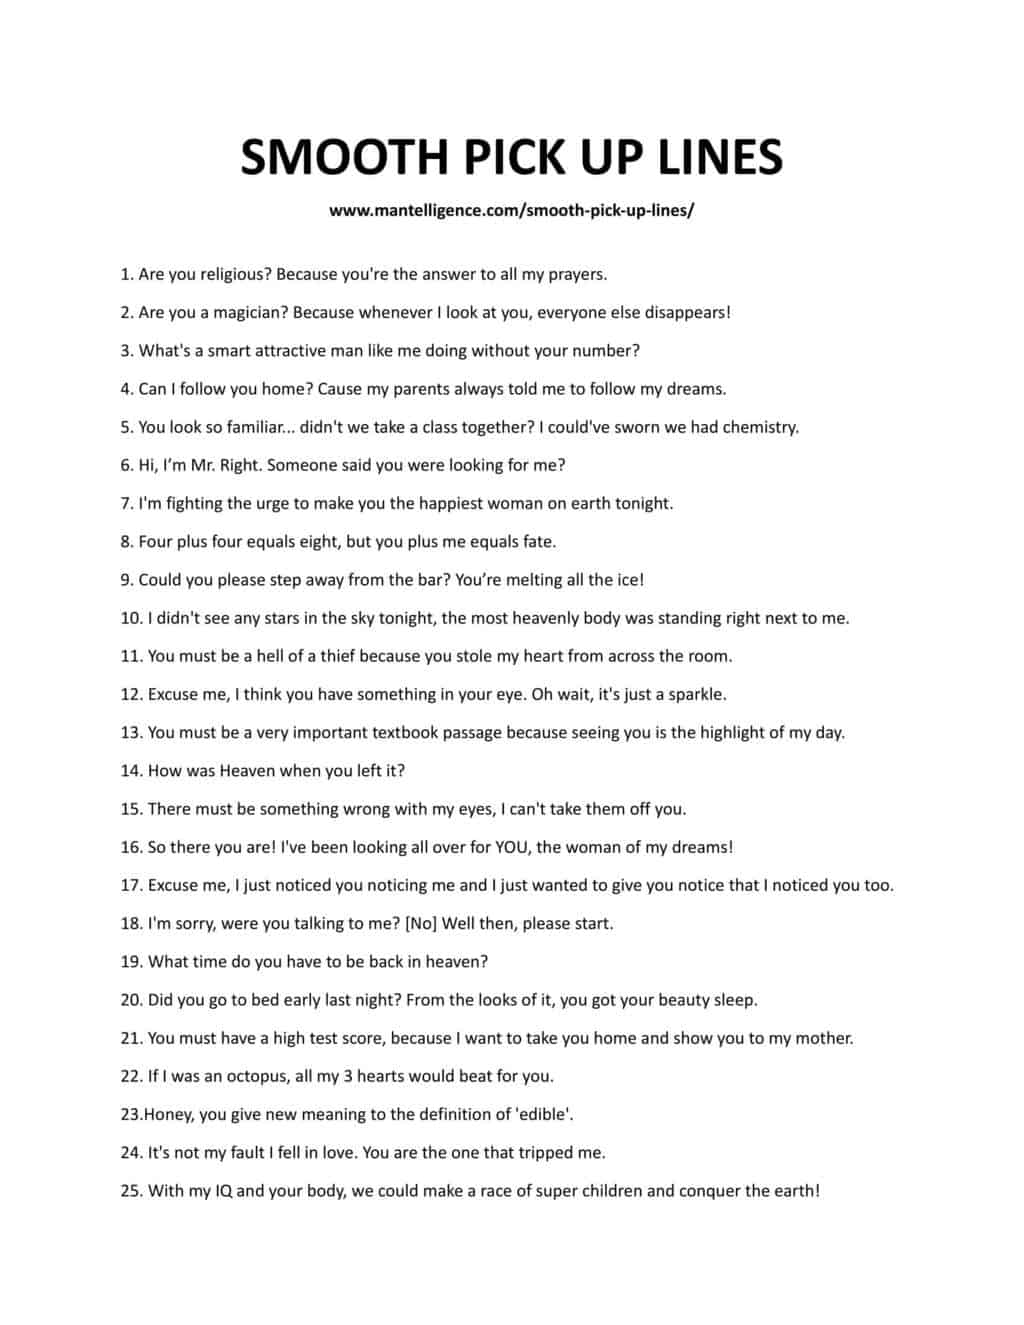 Downloadable list of pick-up lines